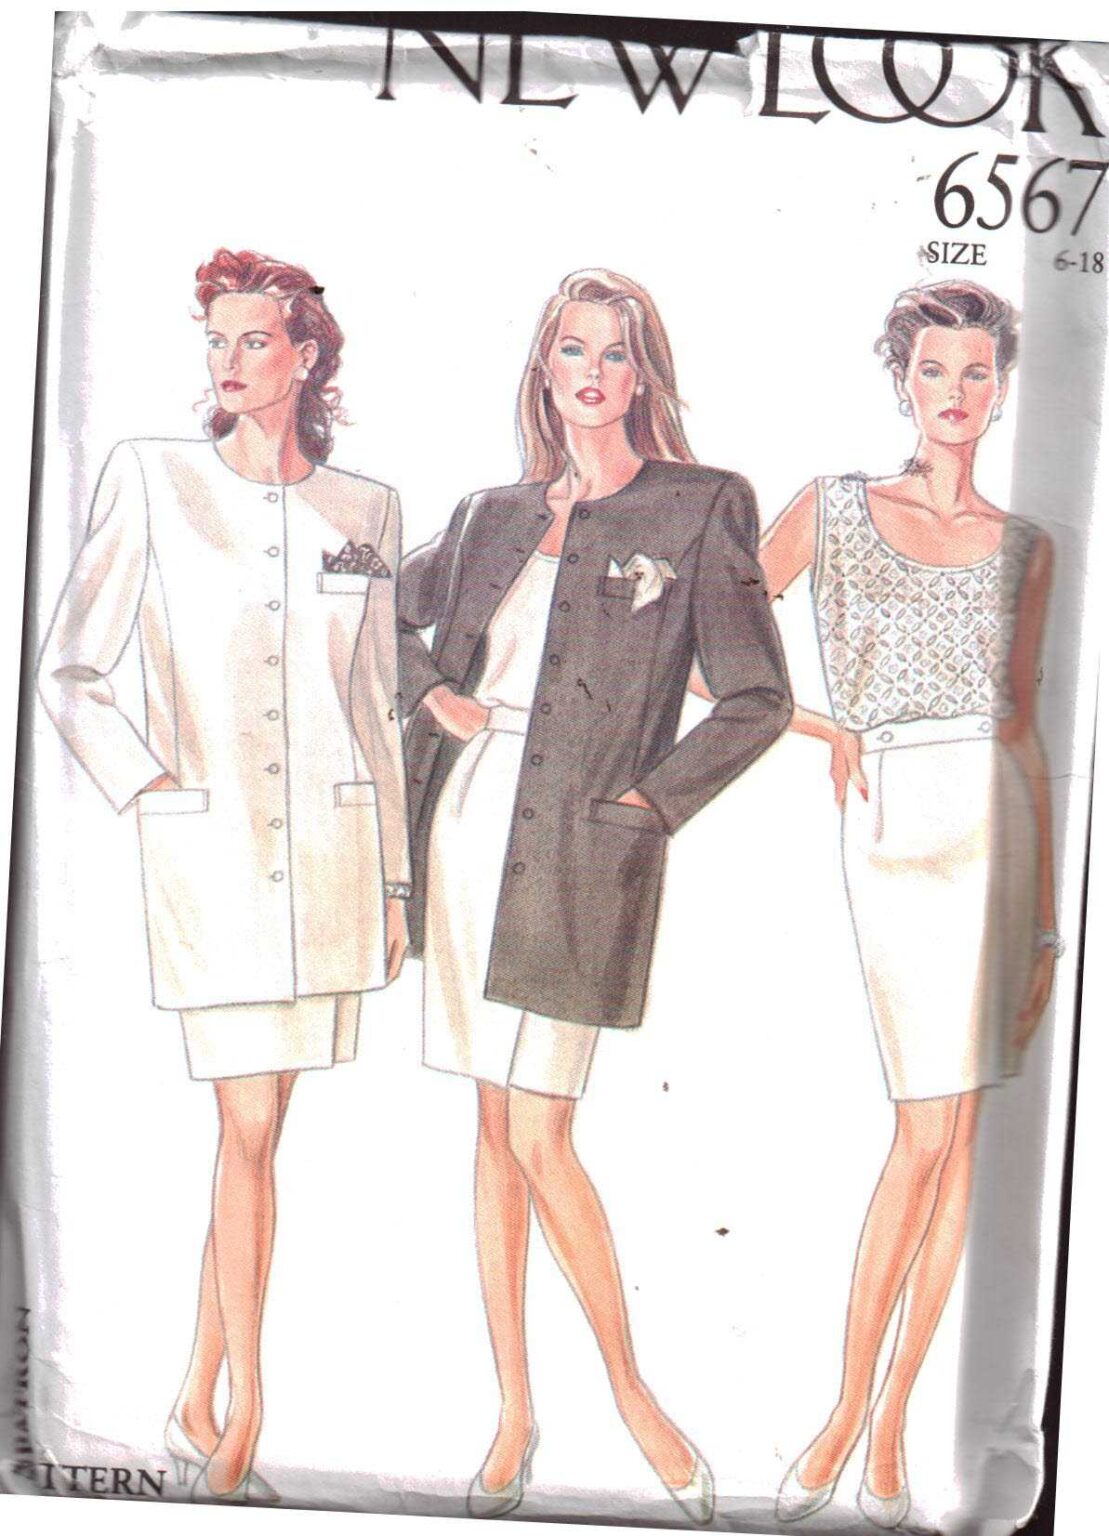 New Look 6567 Skirt, Top, Jacket Size: 6-18 Uncut Sewing Pattern